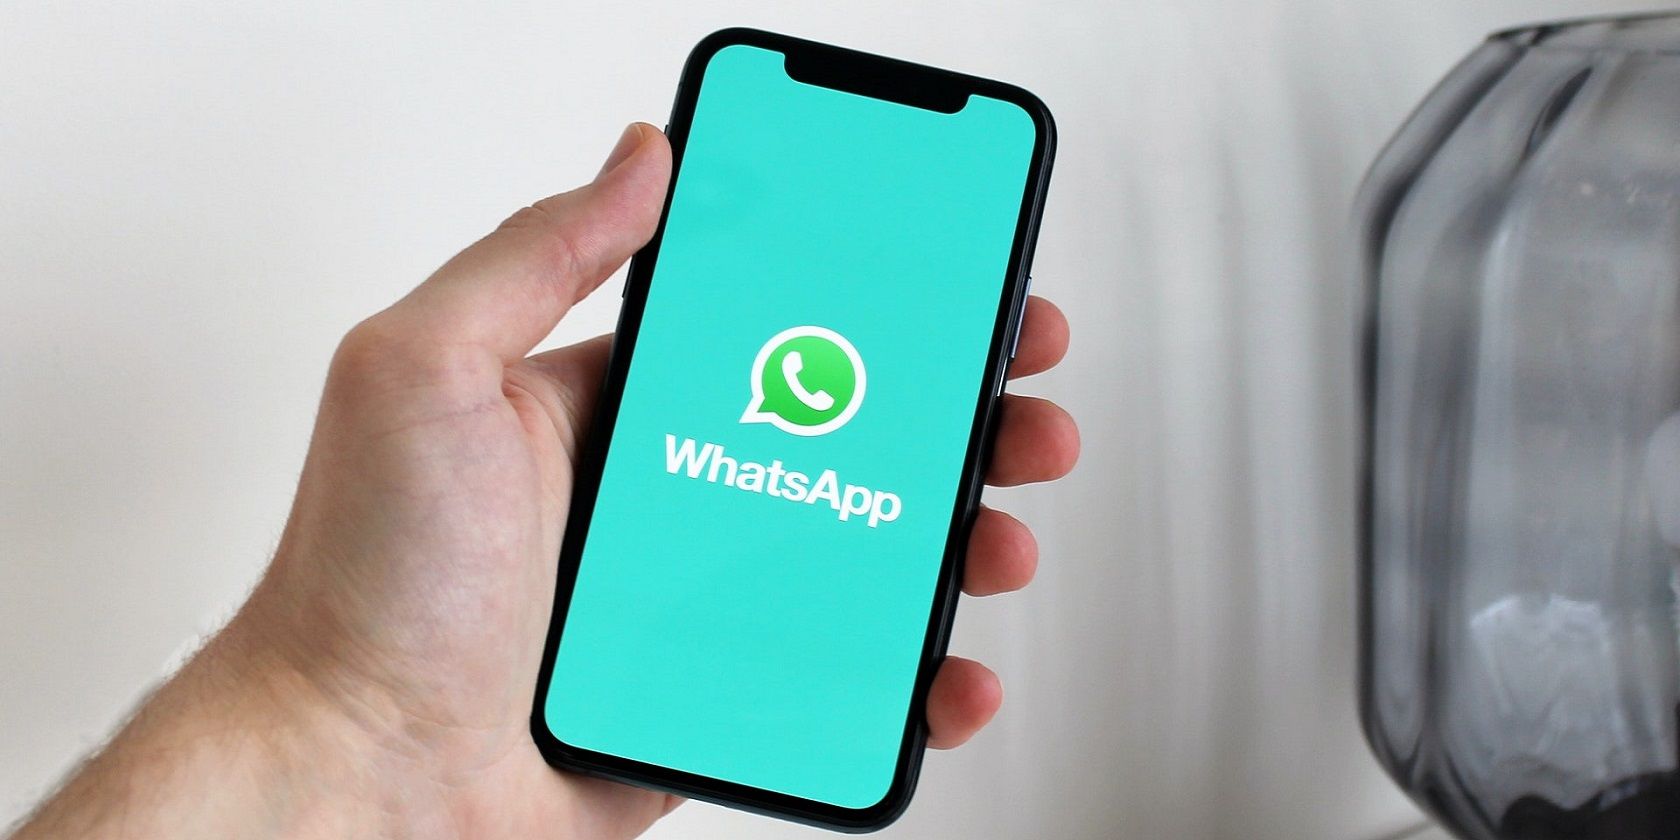 whatsapp single view message featured